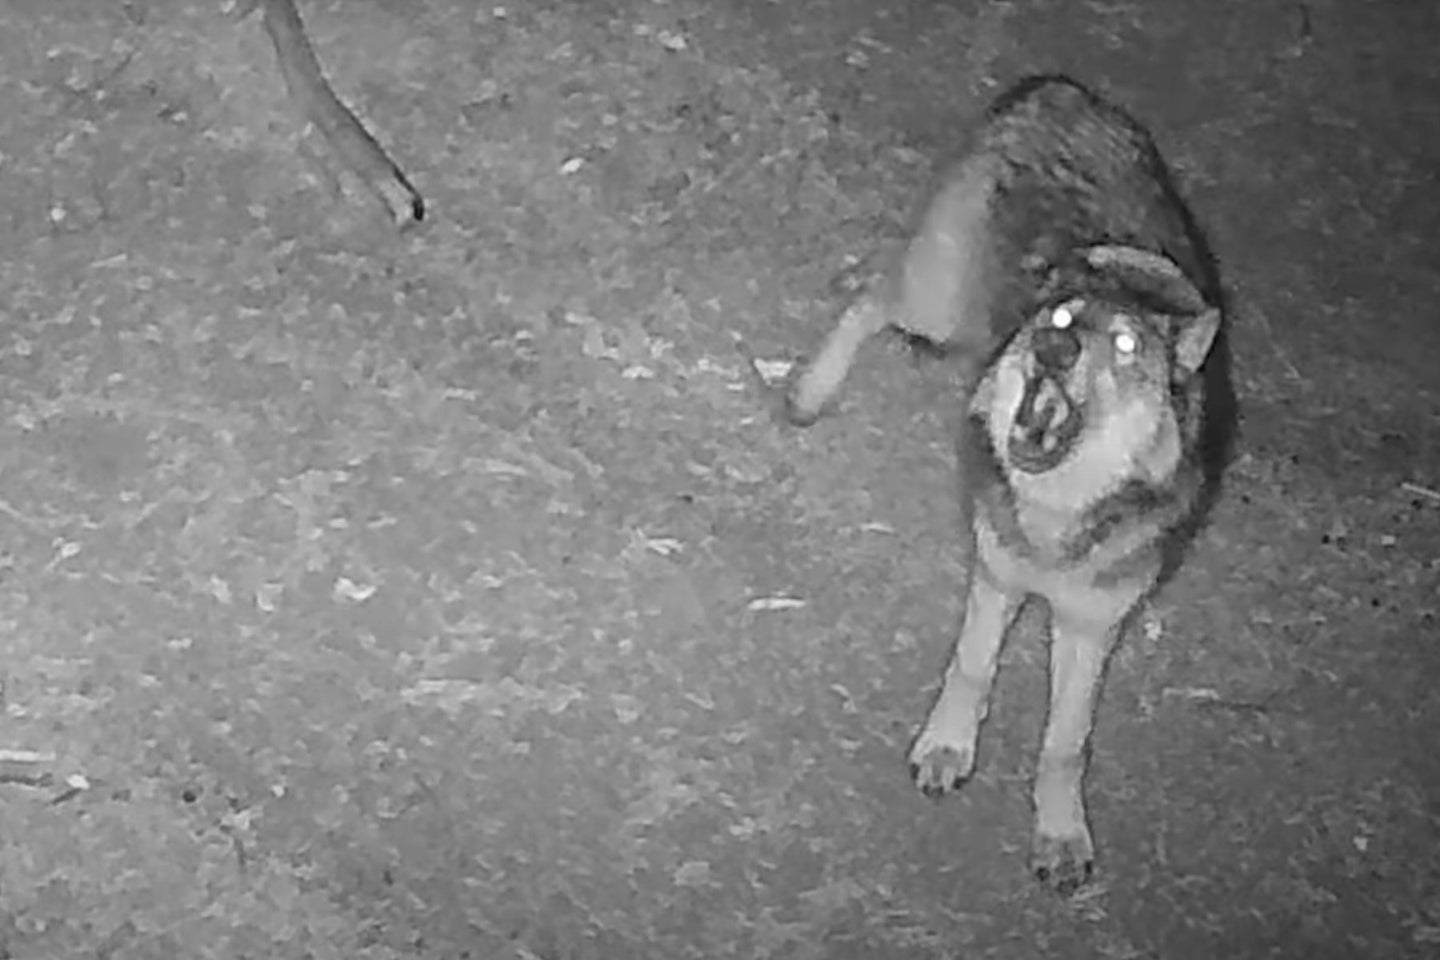 A wolf howls in a recent trail camera video shared by California wildlife officials.